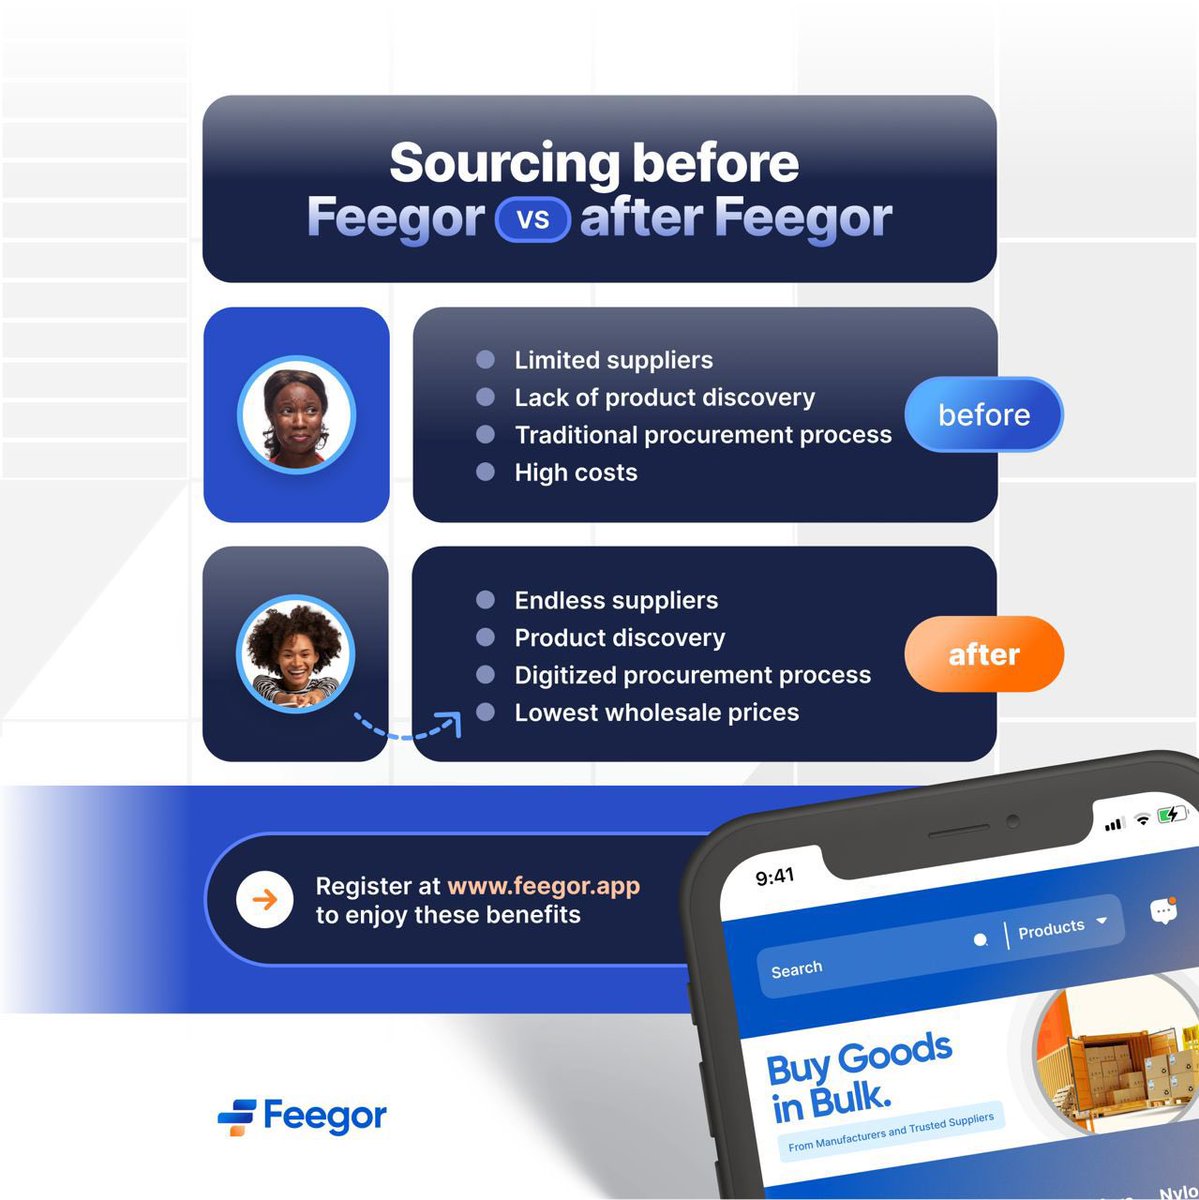 So there’s this friend of mine that’s been complaining of costly it is for her to #BuyInBulk until I introduced her to @feegor_app and since then, she has been enjoing good services. 

The sweet thing here is that she now has trusted suppliers, all thanks to #Feegor  for this.…